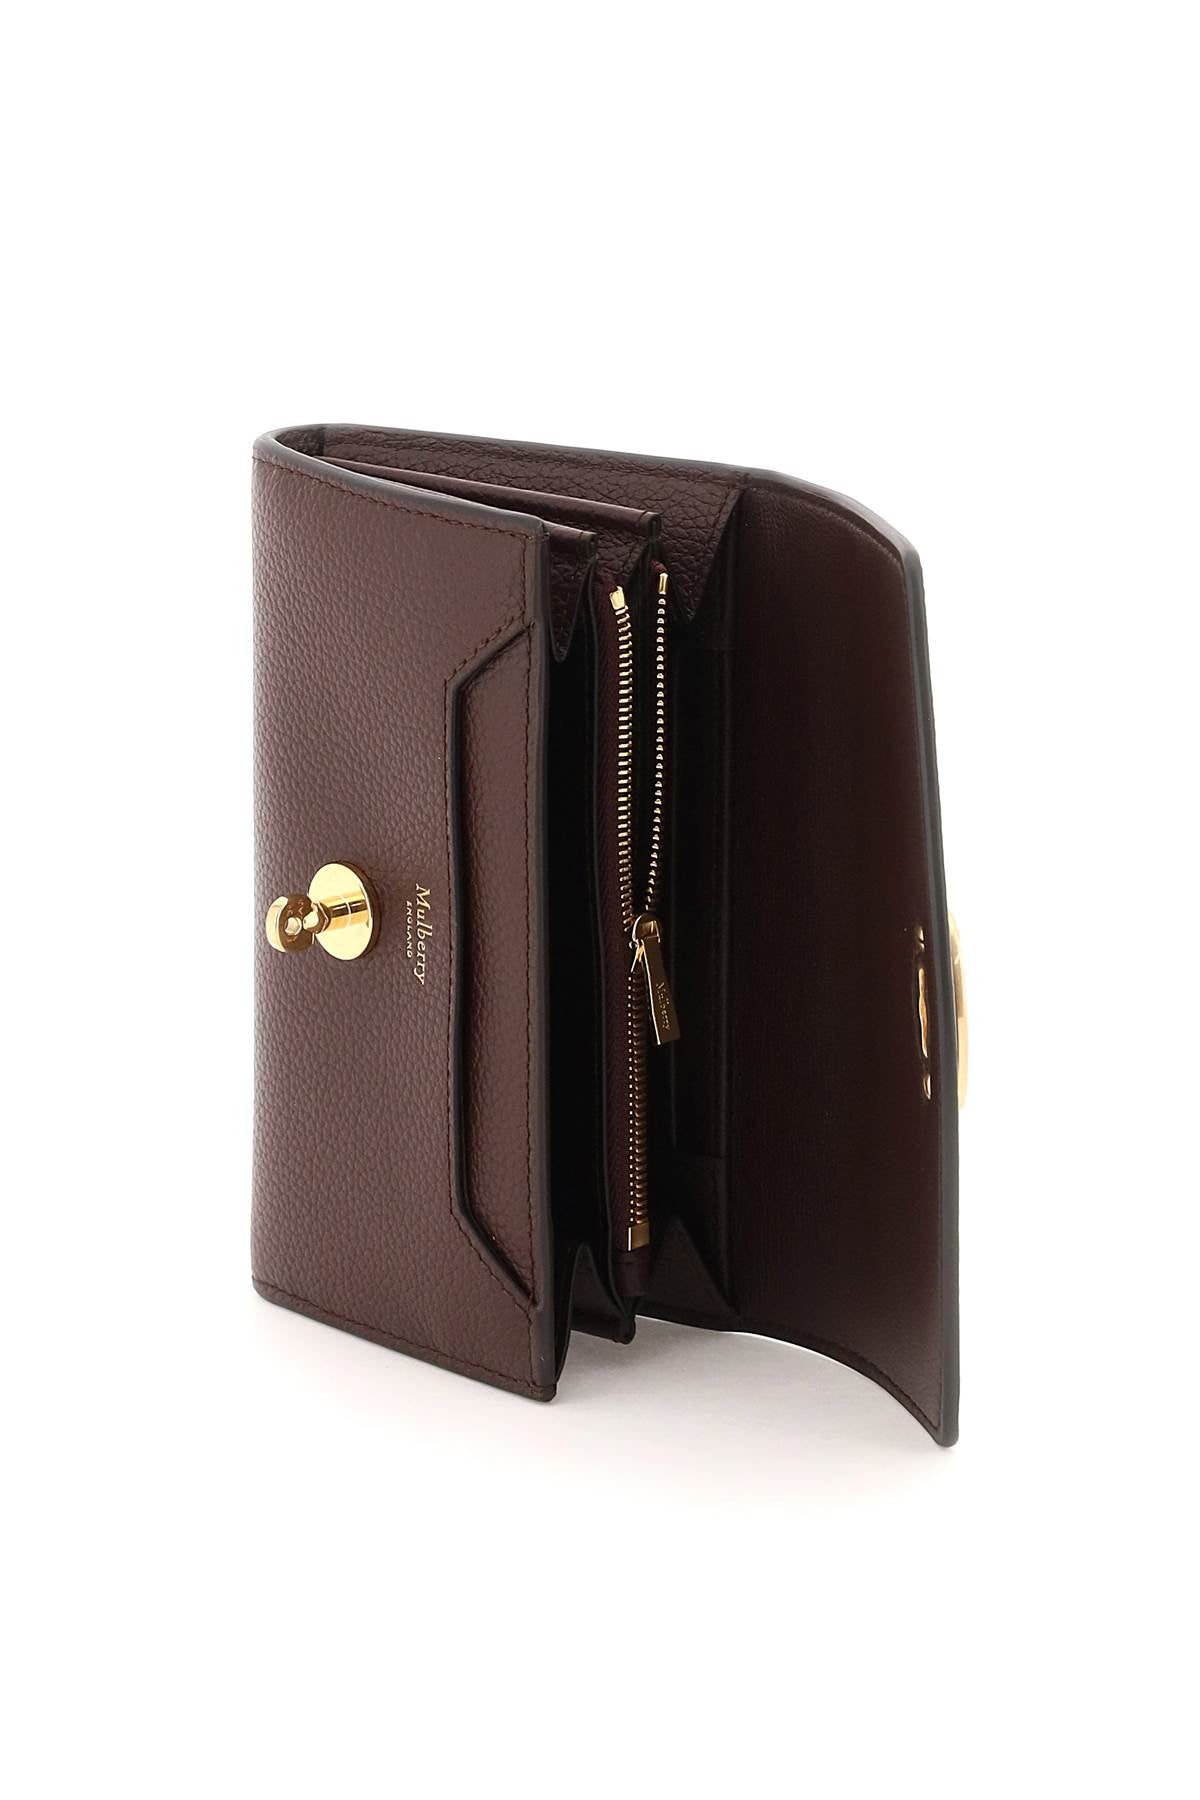 Mulberry Mulberry darley wallet